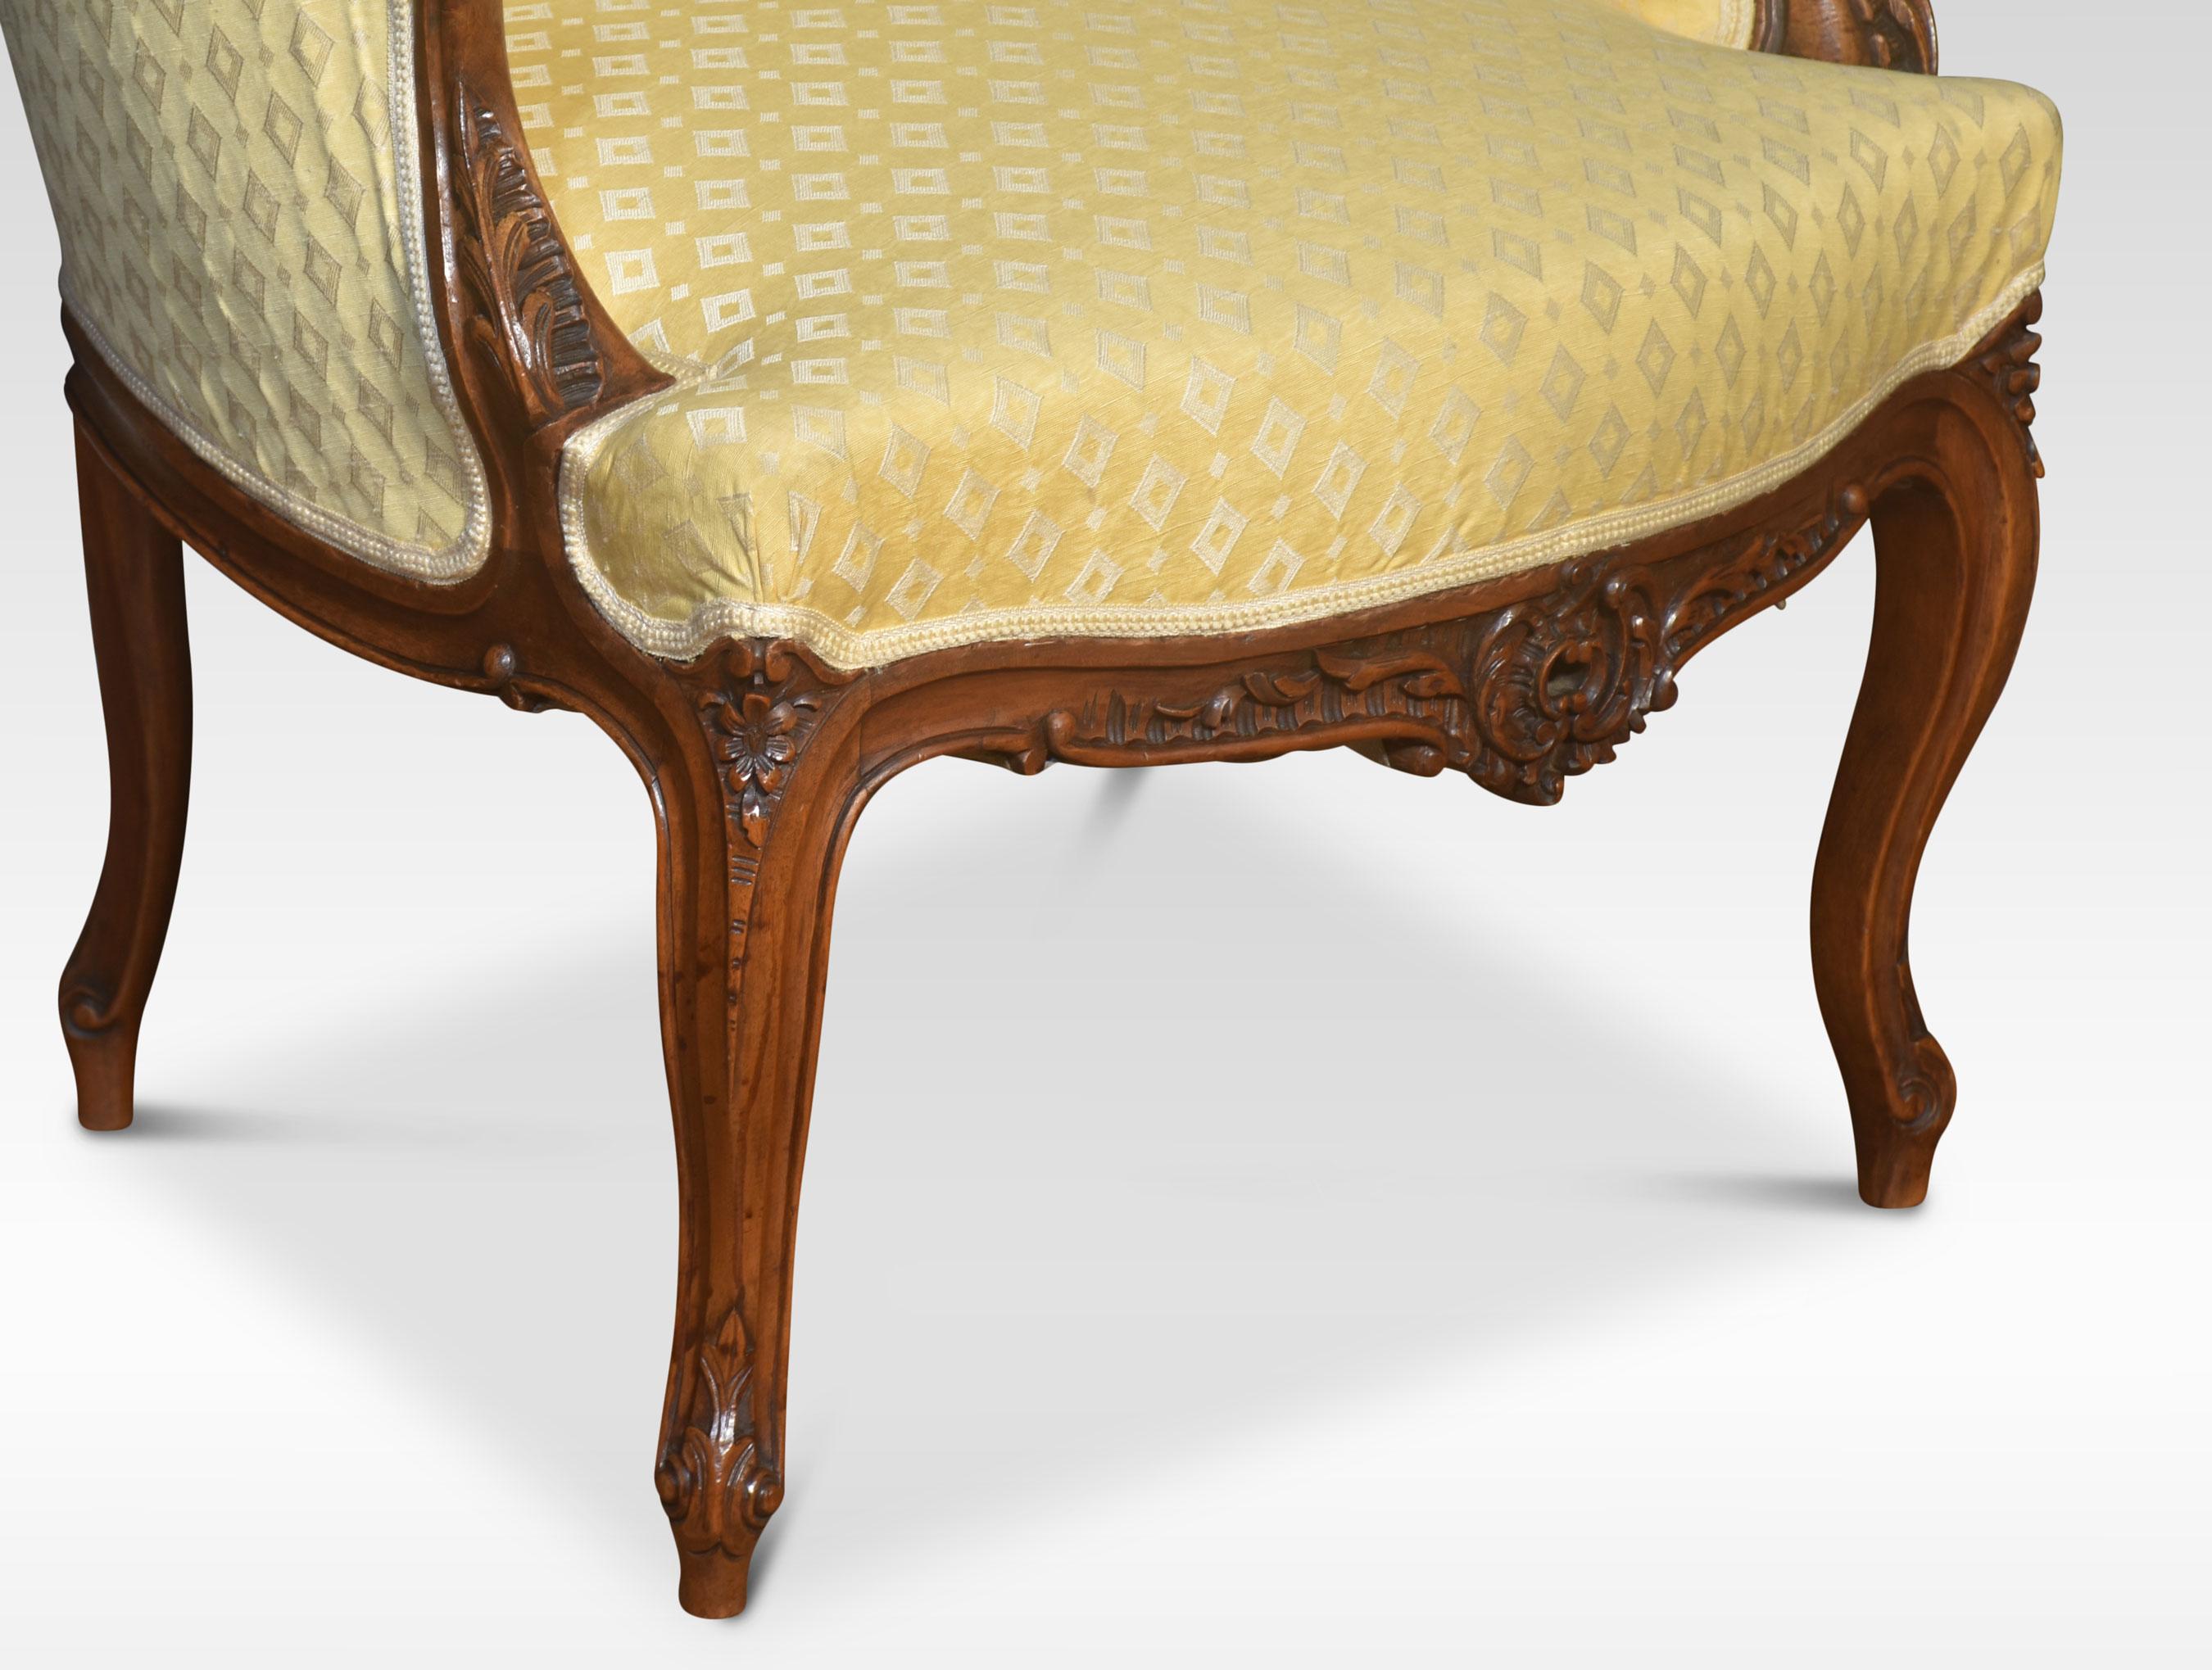 Walnut armchair the carved decorated frame to the upholstered back and seat enclosed by scrolling arms. All raised up on four slender cabriole supports terminating in scrolling toes.
Dimensions
Height 34 Inches height to seat 17.5 Inches
Width 25